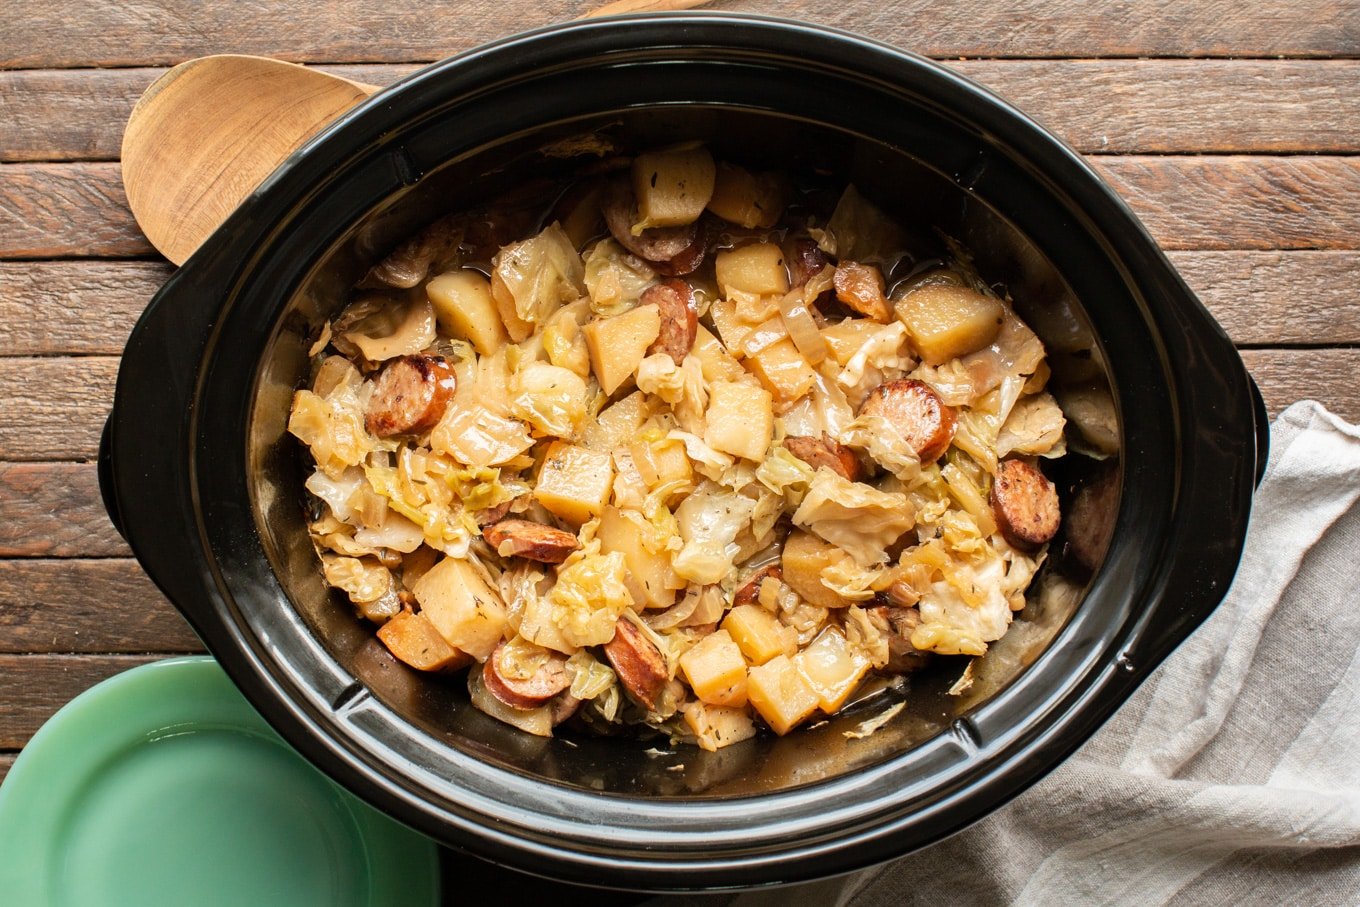 finished cooking potatoes, kielbasa and cabbage in an oval slow cooker.